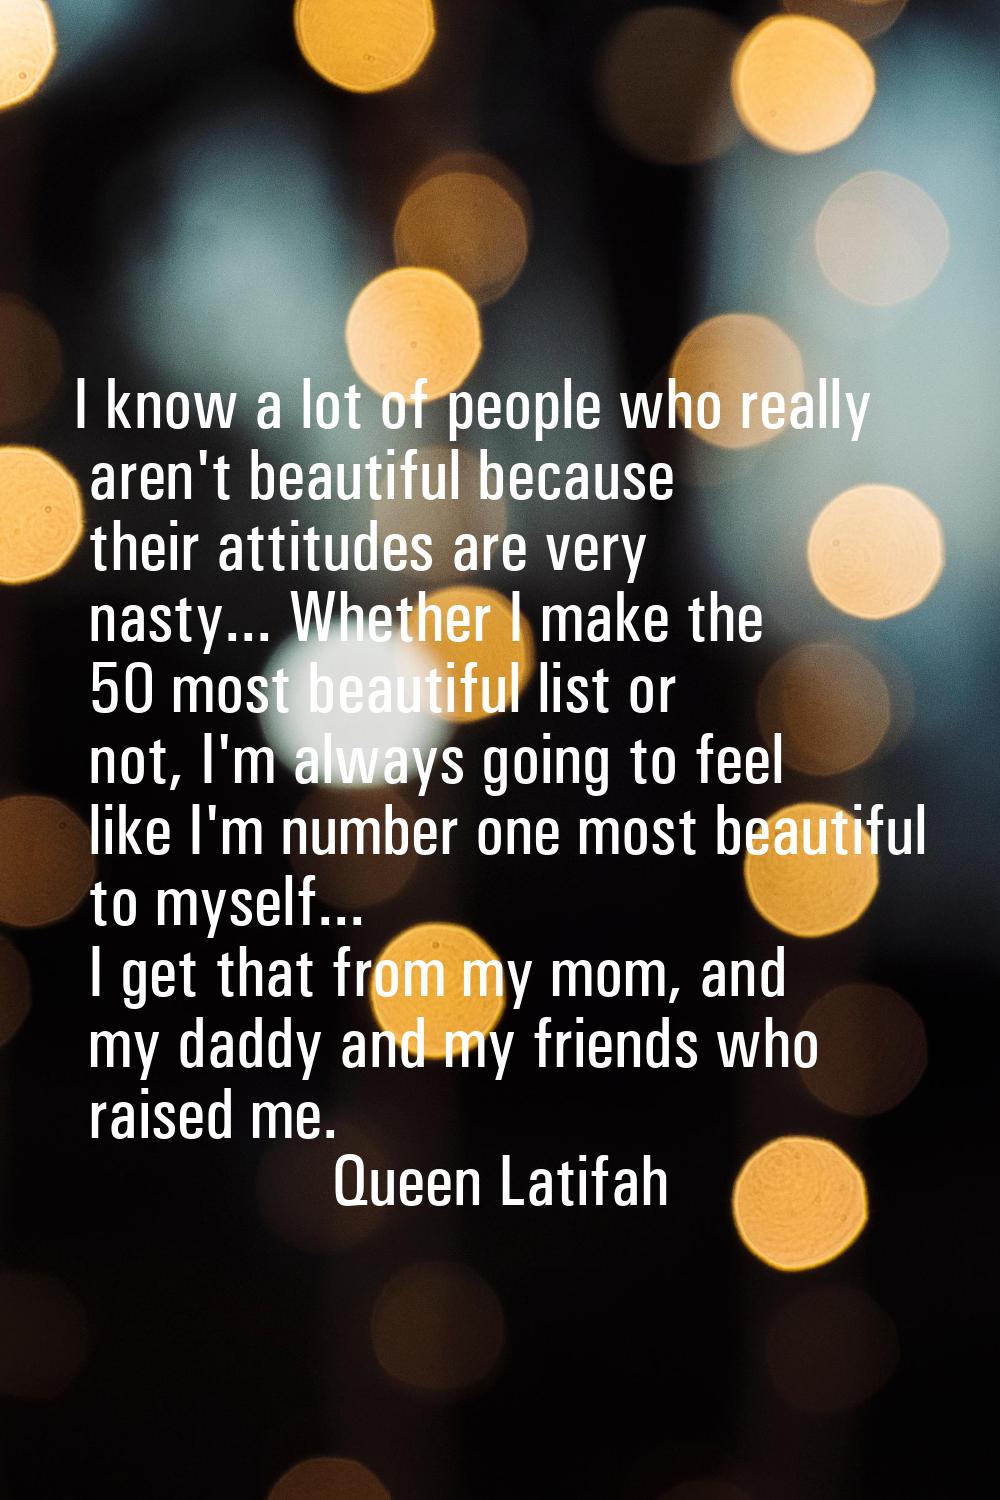 I know a lot of people who really aren't beautiful because their attitudes are very nasty... Whethe